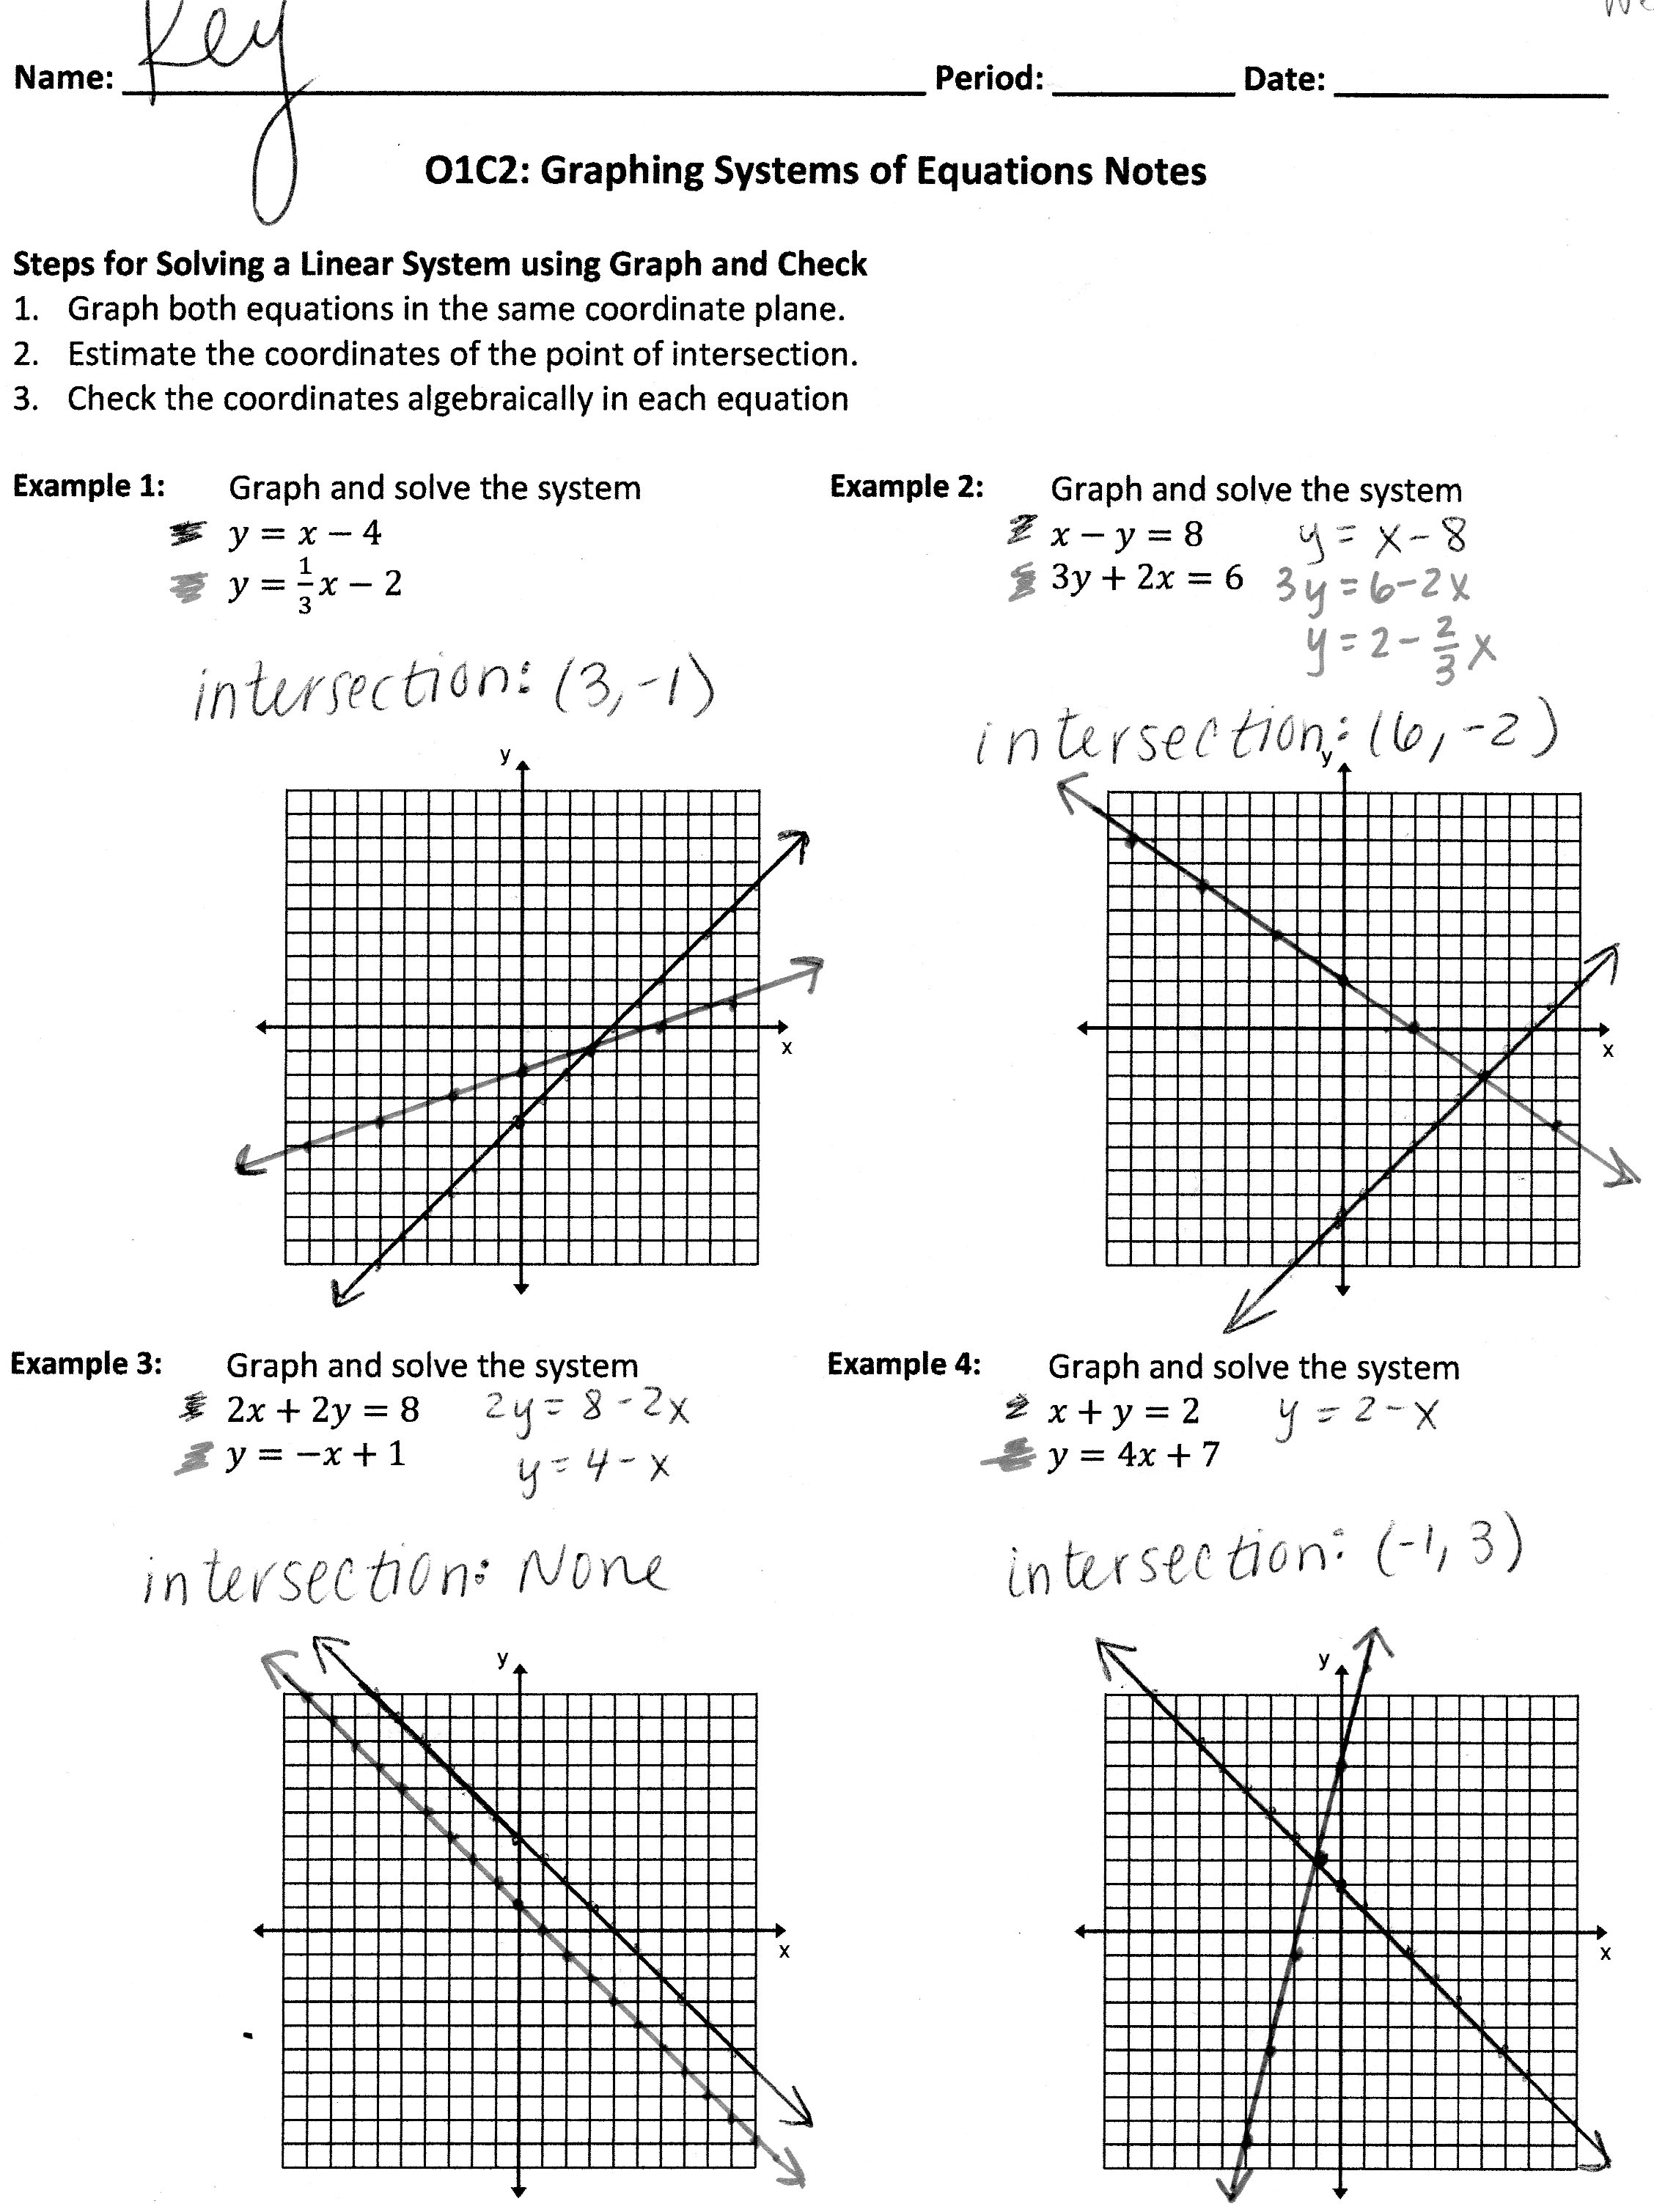 Solving Systems of Equations by Graphing Worksheets Image